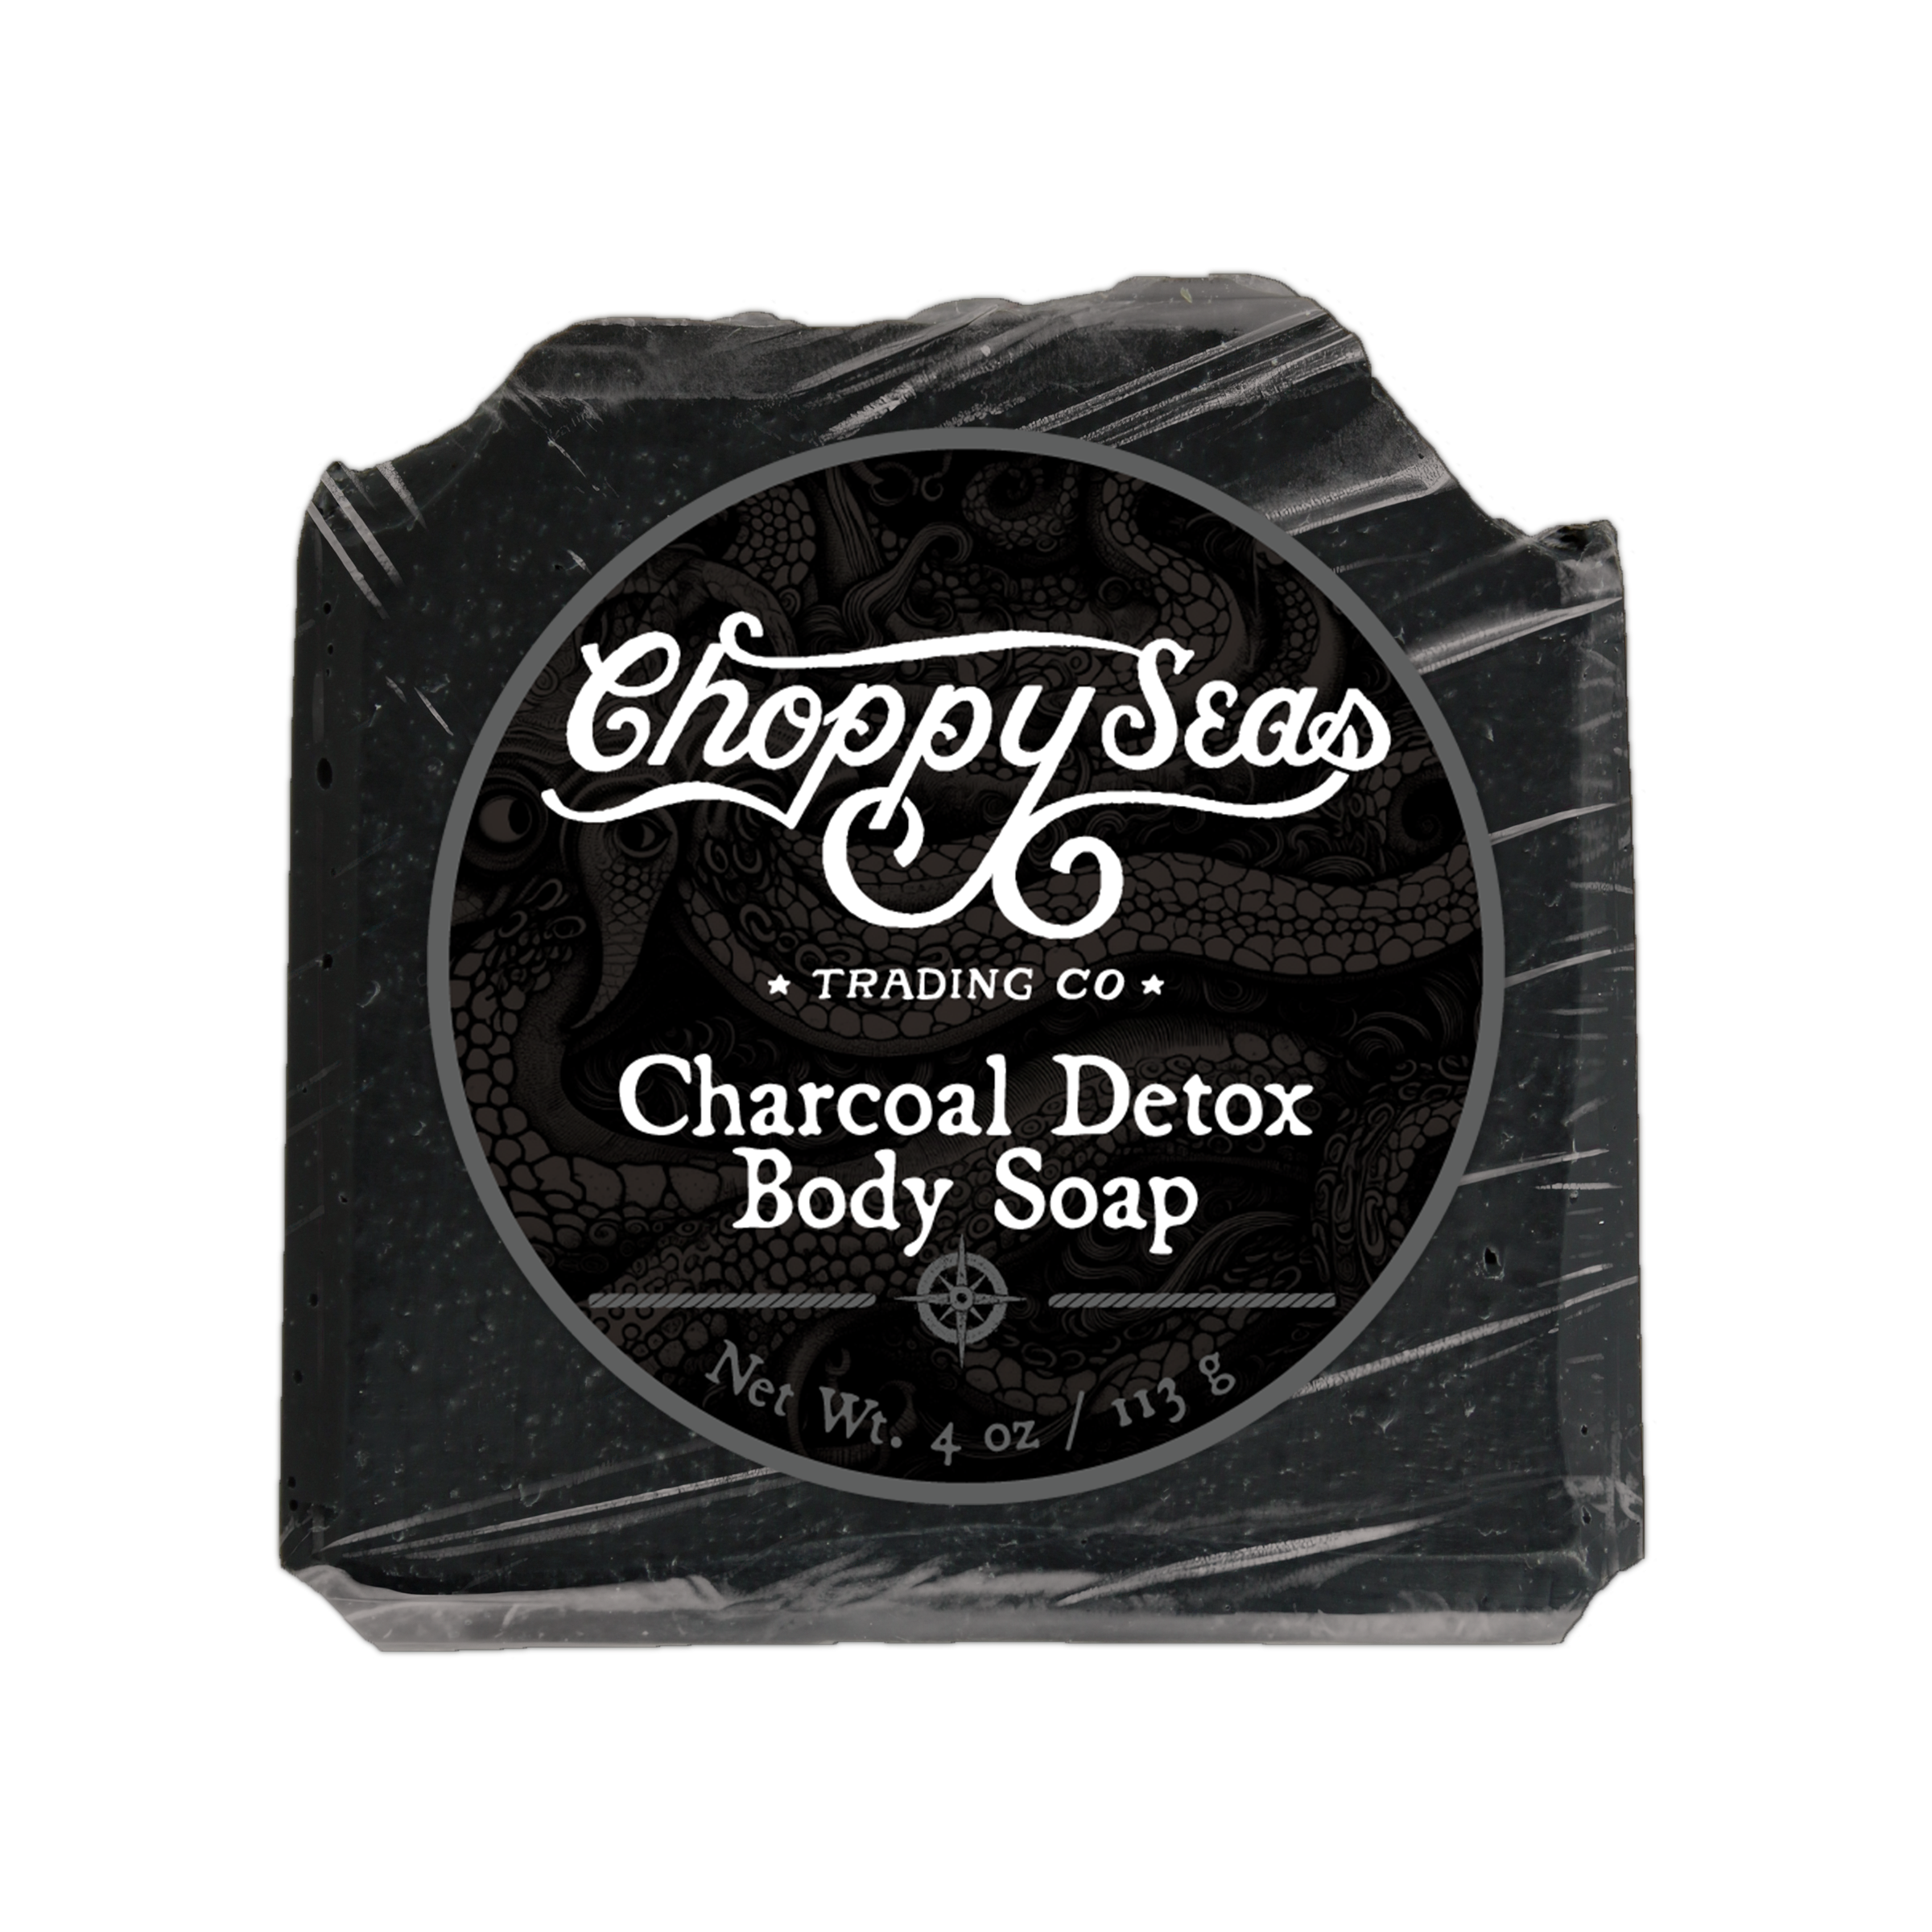 Unscented Charcoal Detox Body Soap